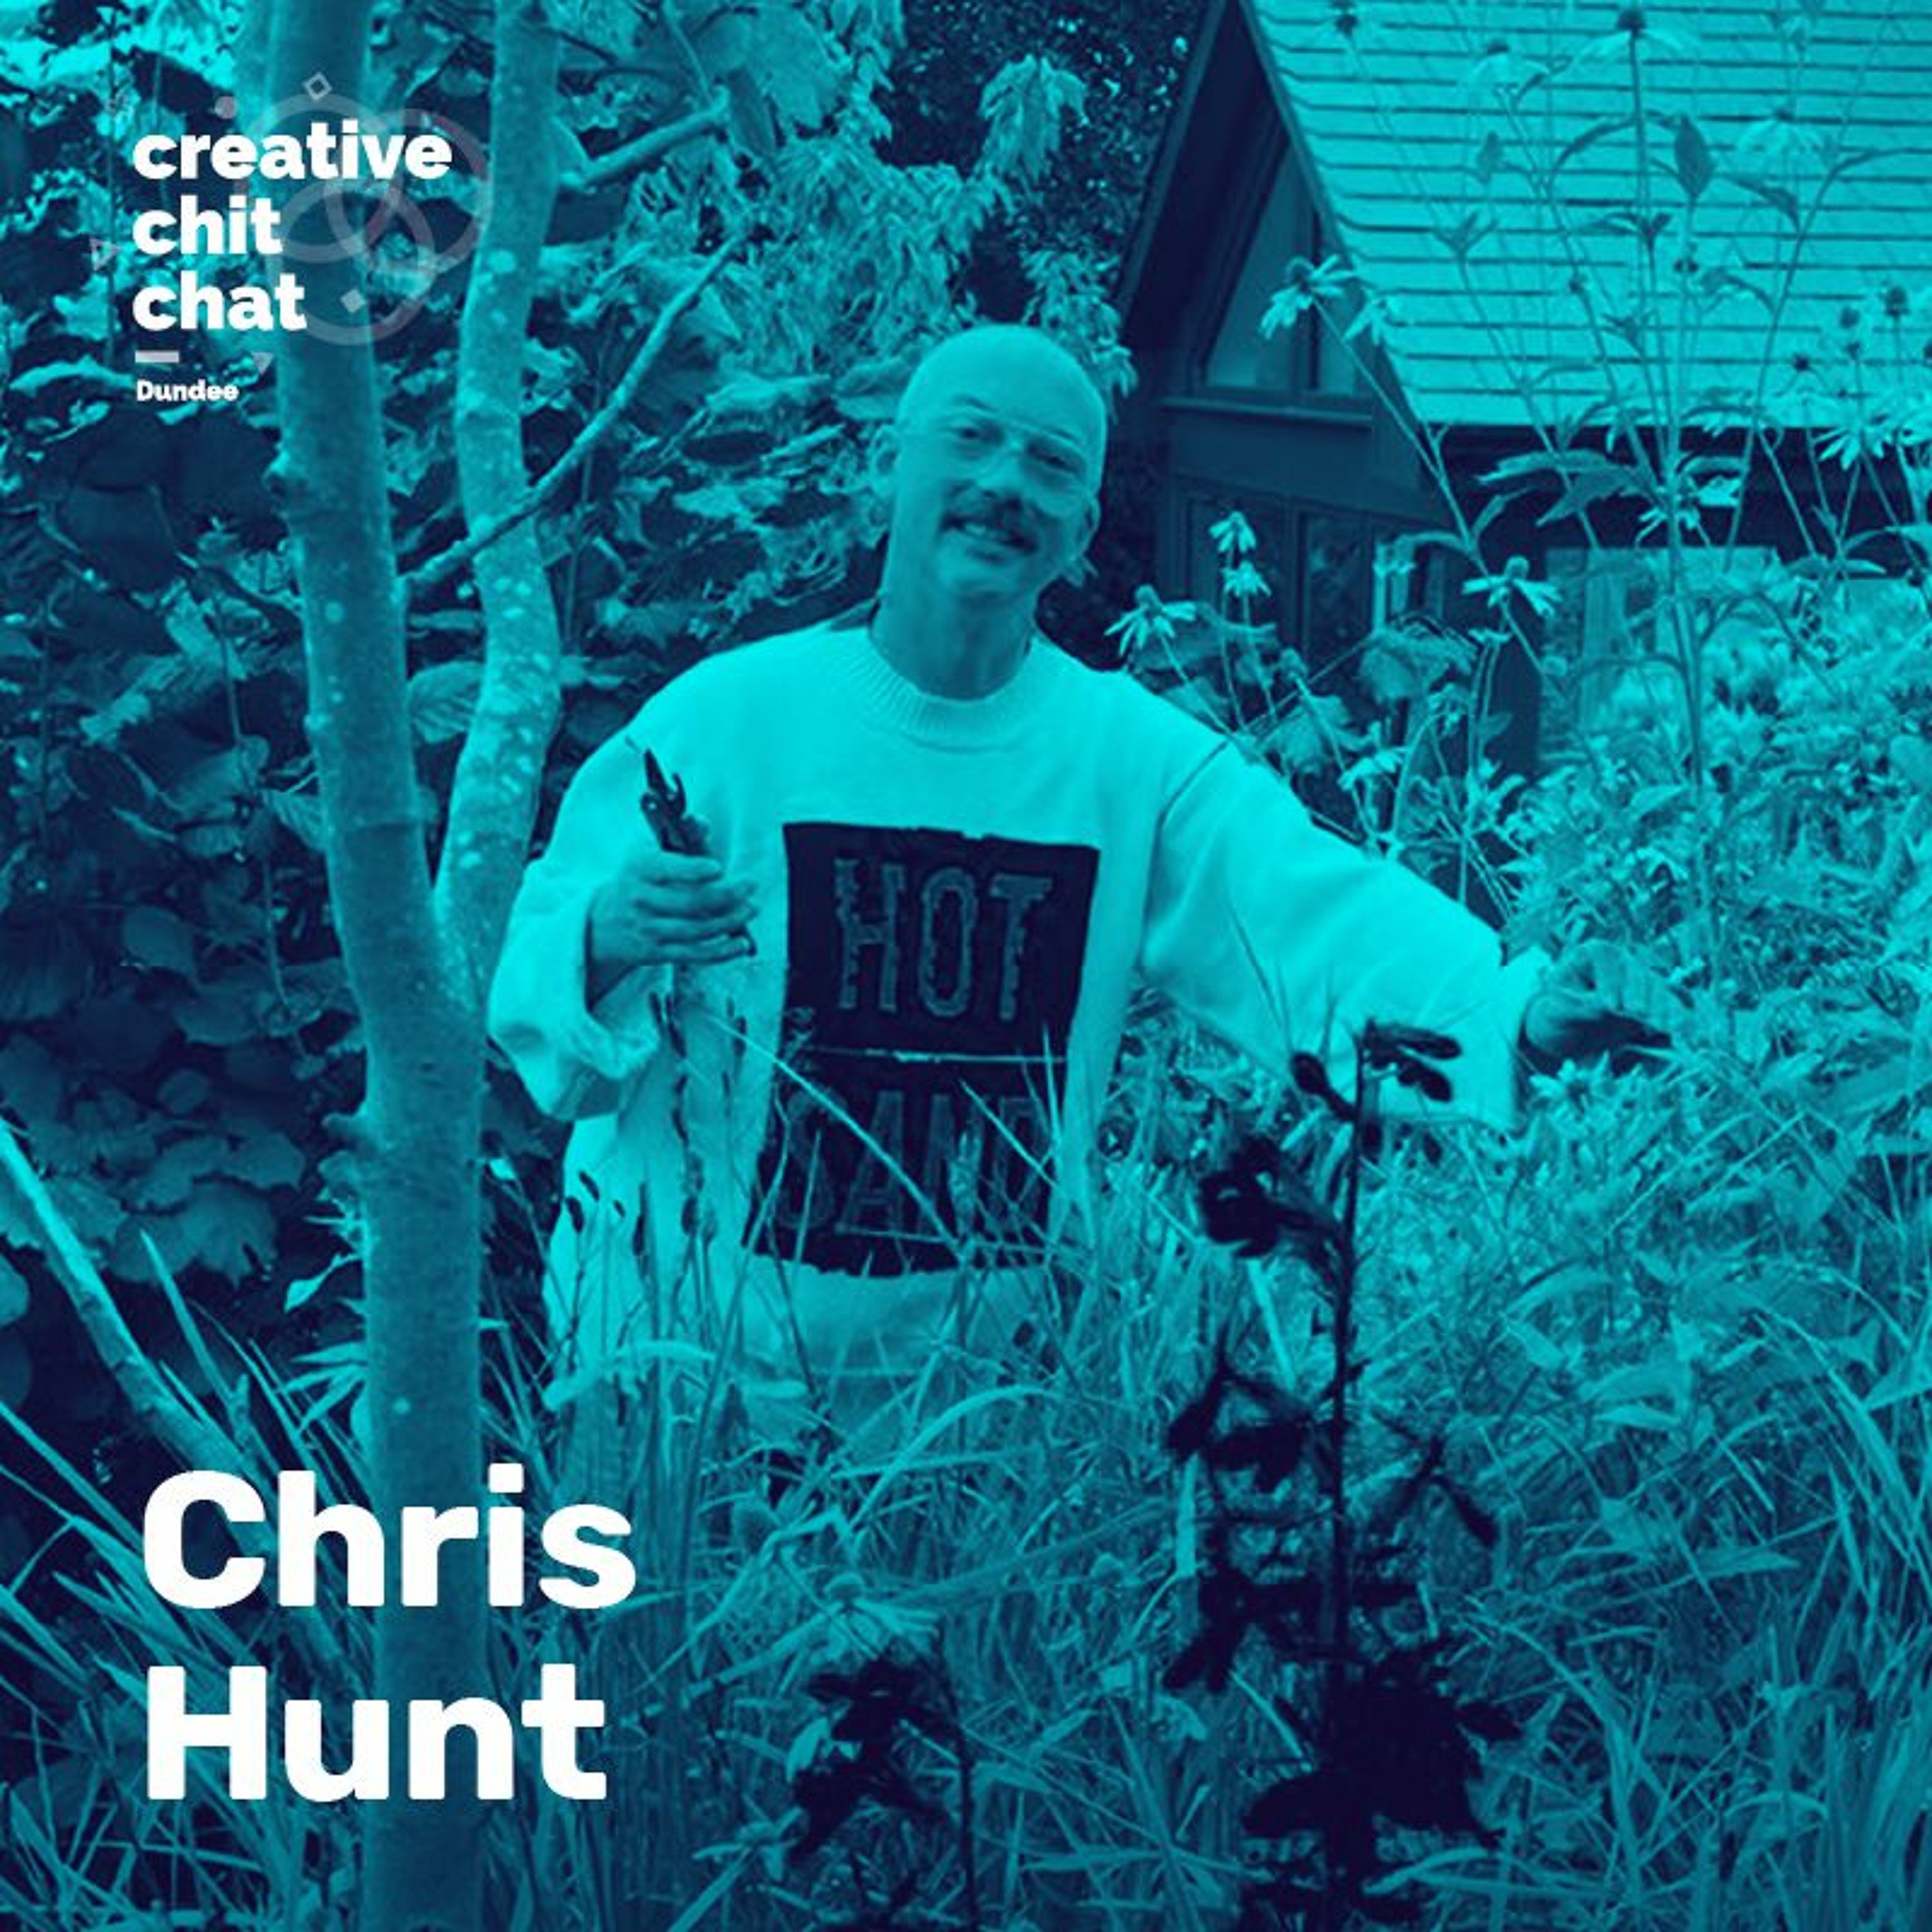 Chris Hunt - Creativity as a route to a new world